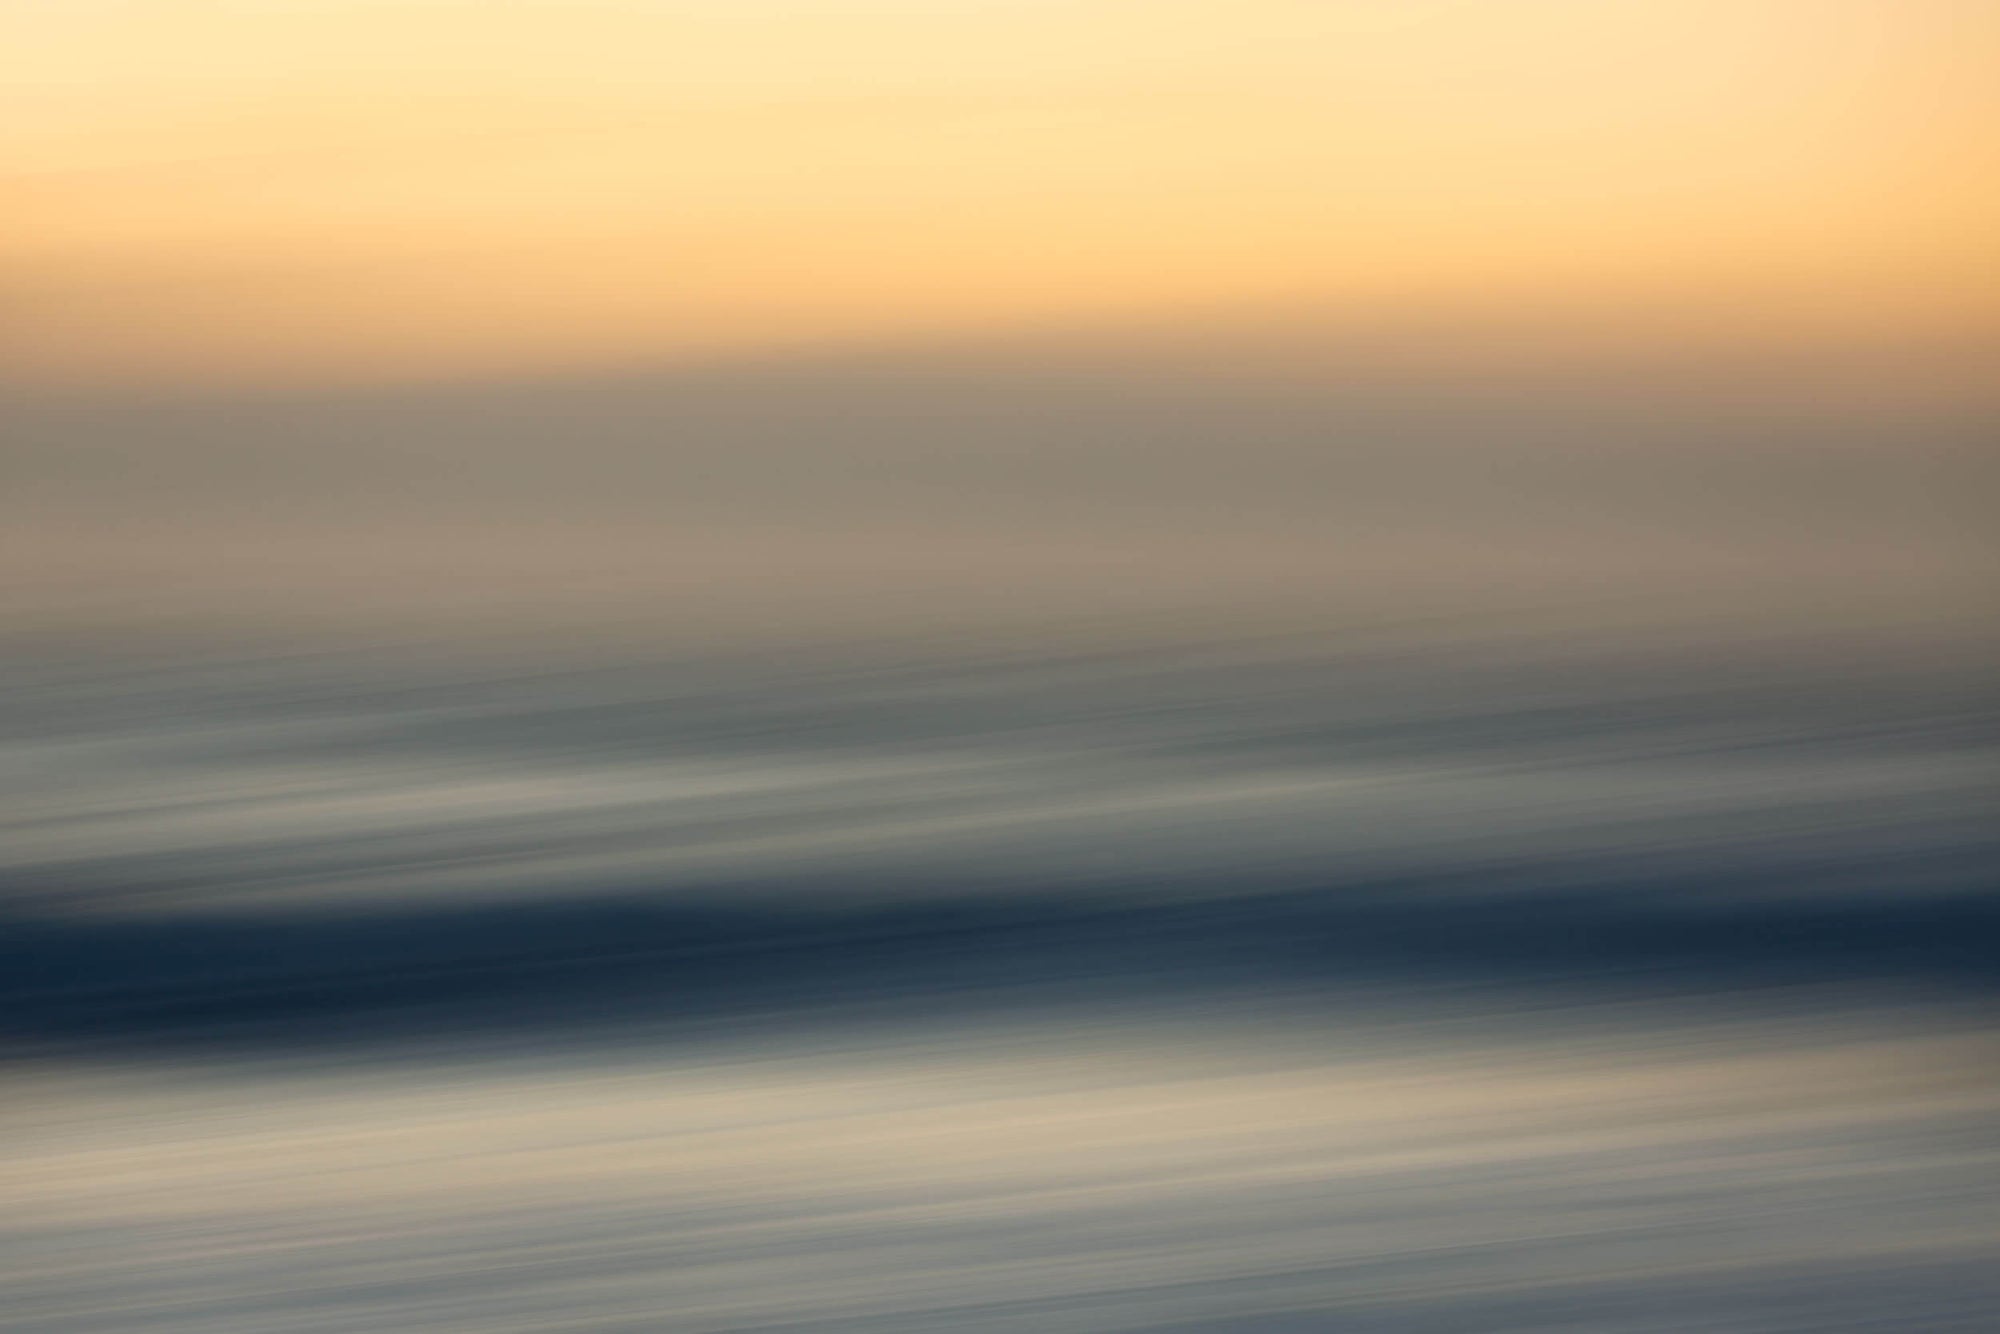 An abstract sunset picture photographed in Big Sur, California.